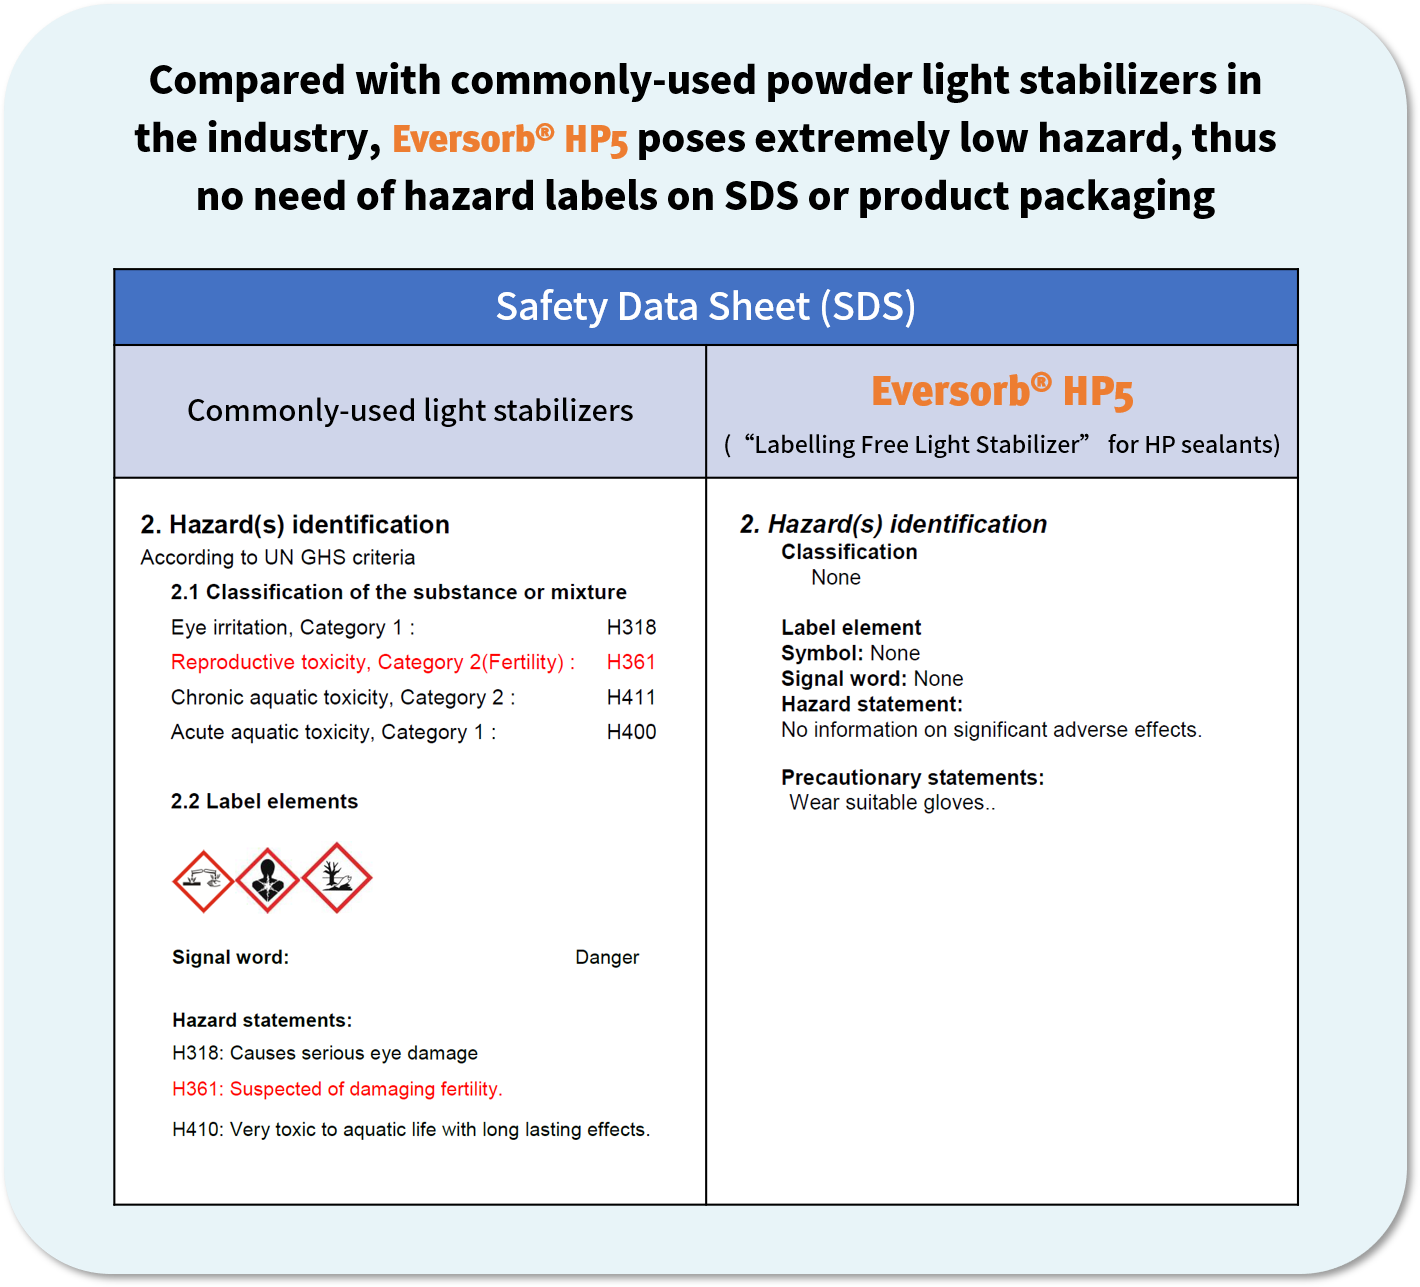 “Labelling Free Light Stabilizer” for silane-modified sealants－Eversorb® HP5